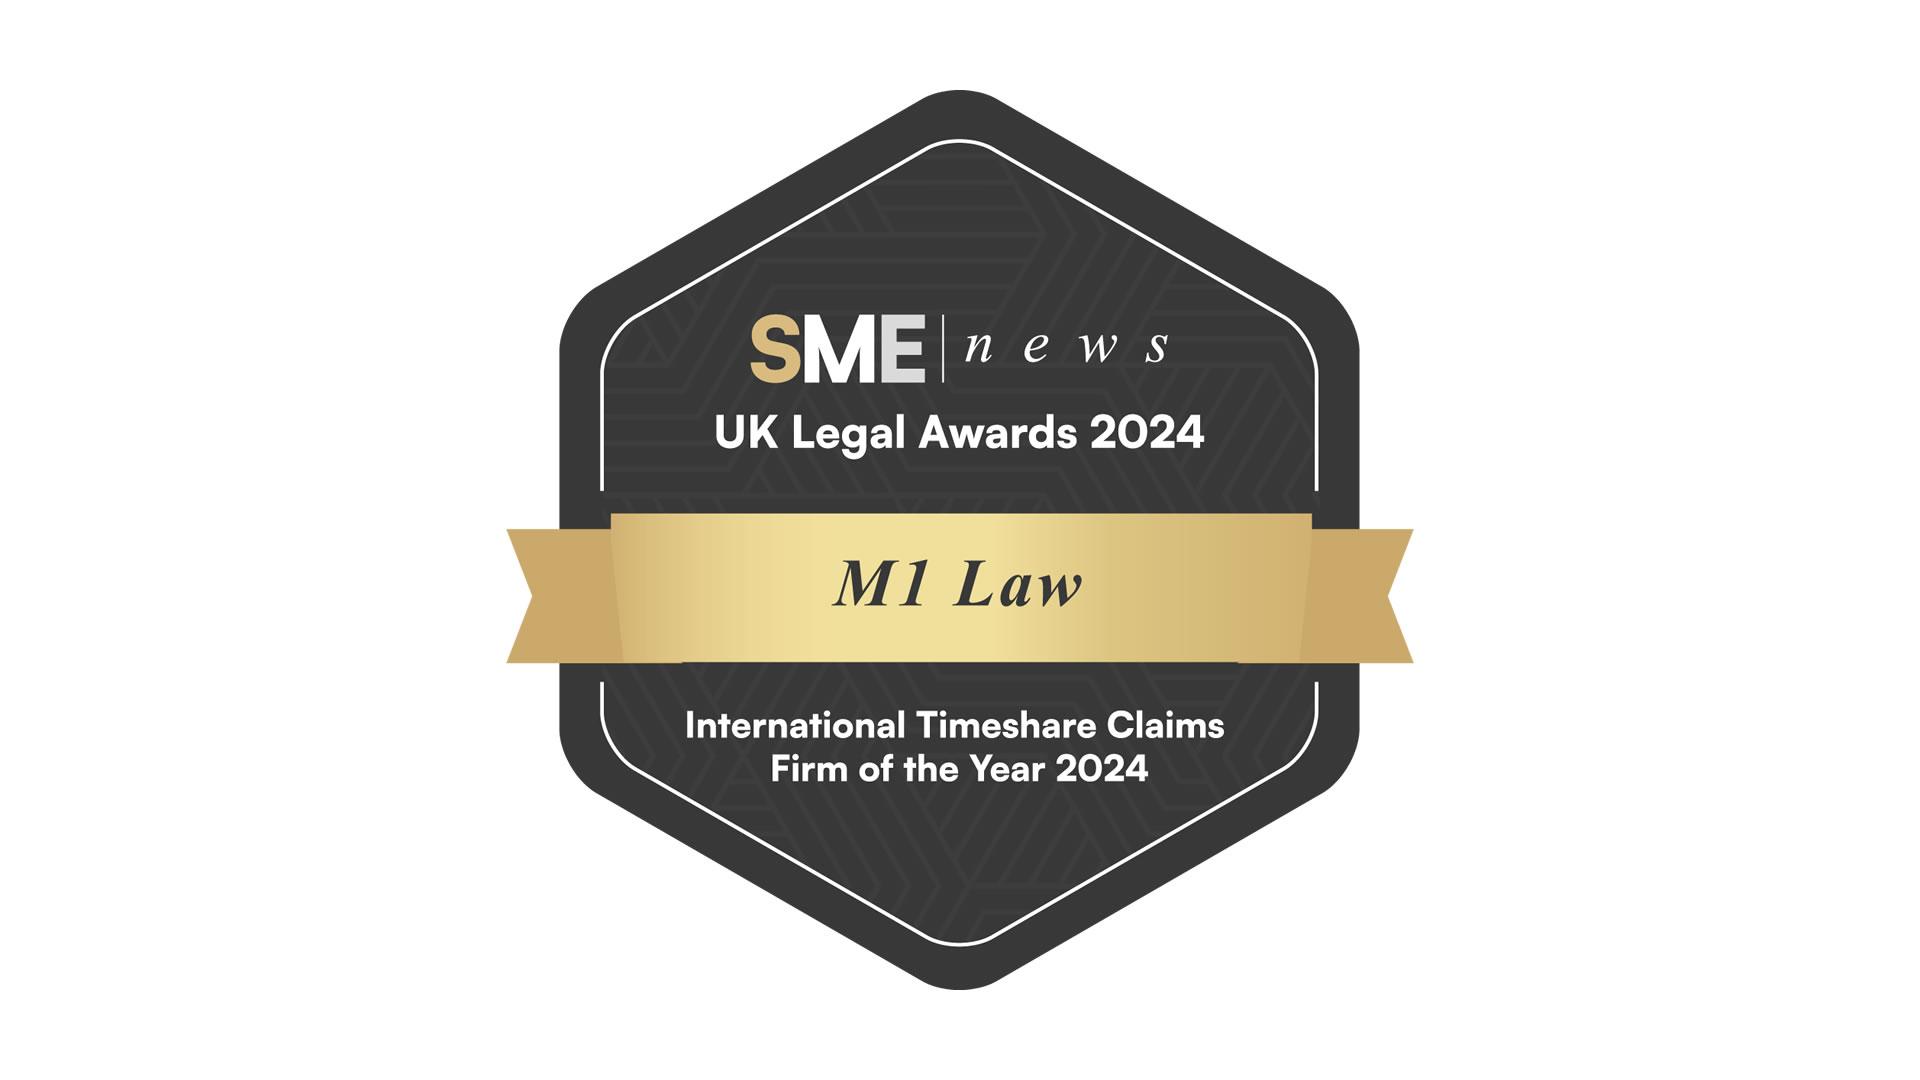 M1 Law wins International Timeshare Claims Firm of the Year 2024